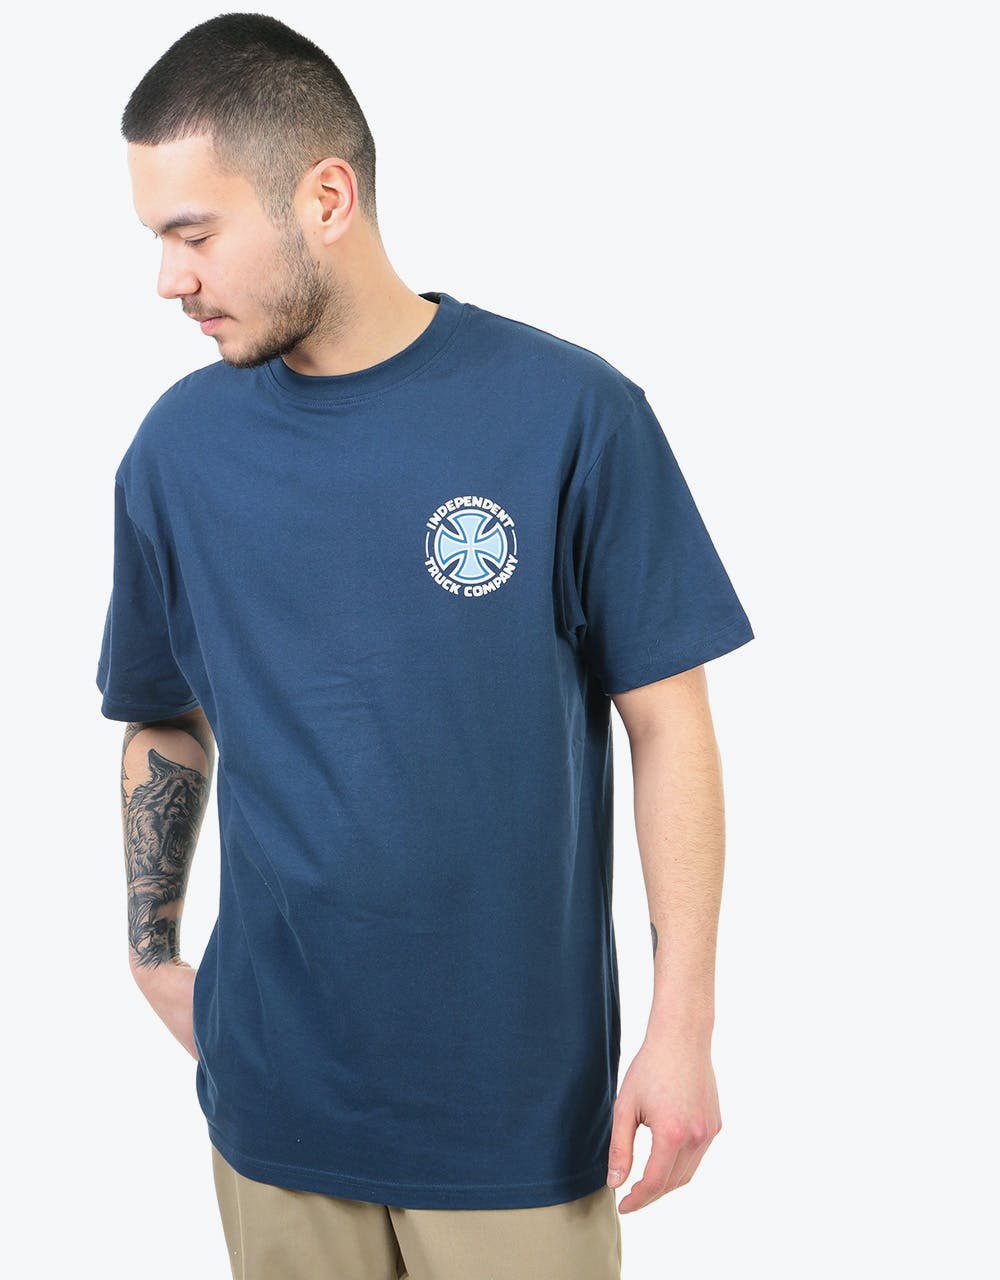 Independent Repeat Cross T-Shirt - Navy